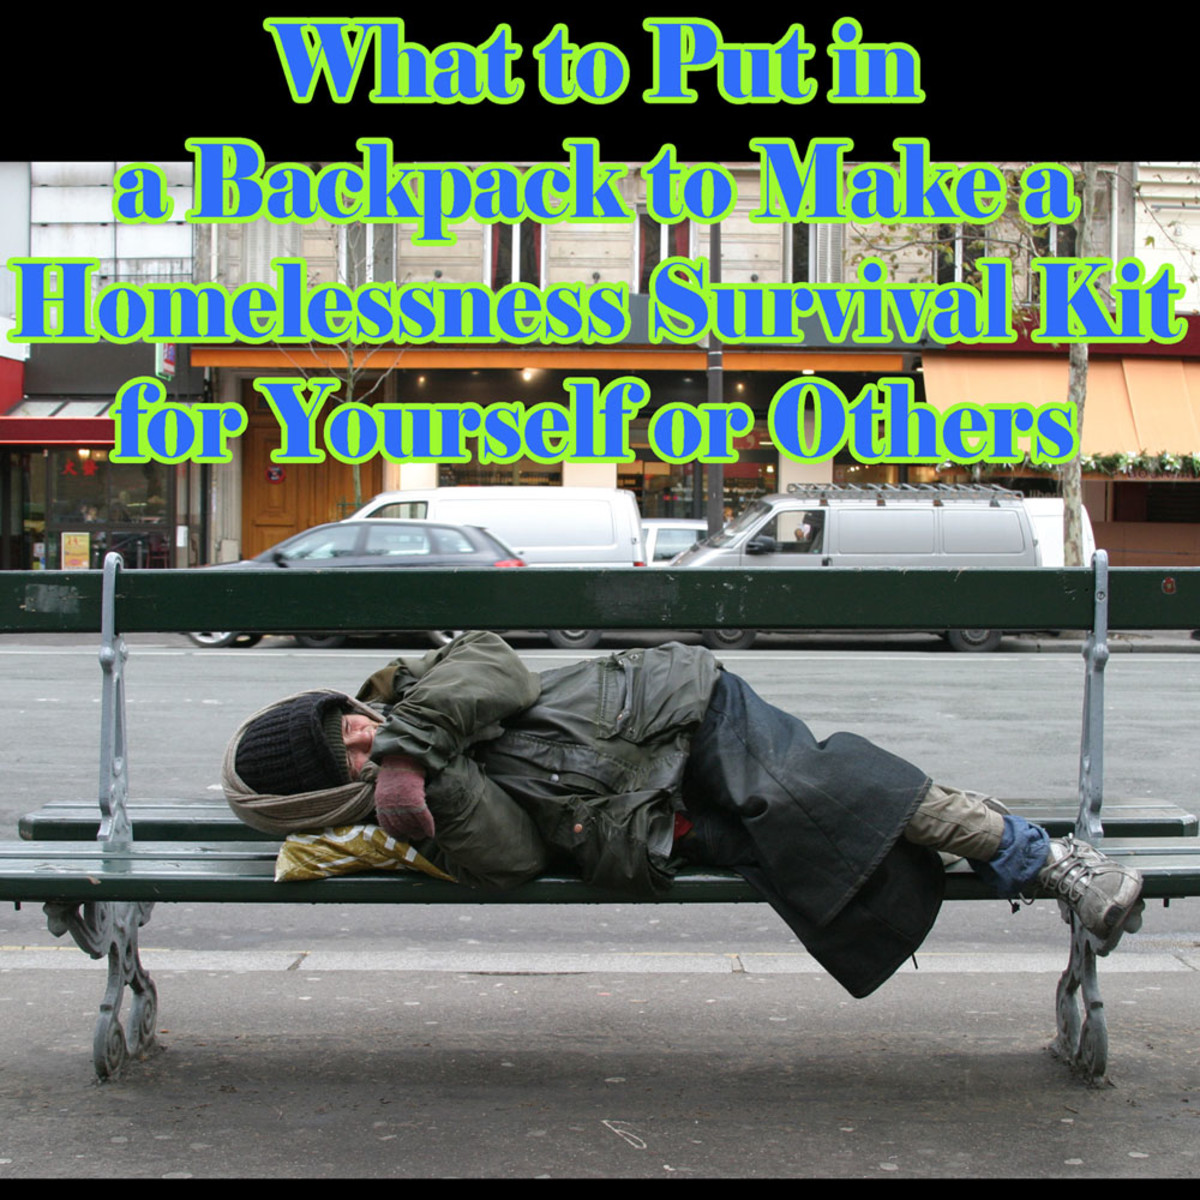 What to Buy if You are Homeless